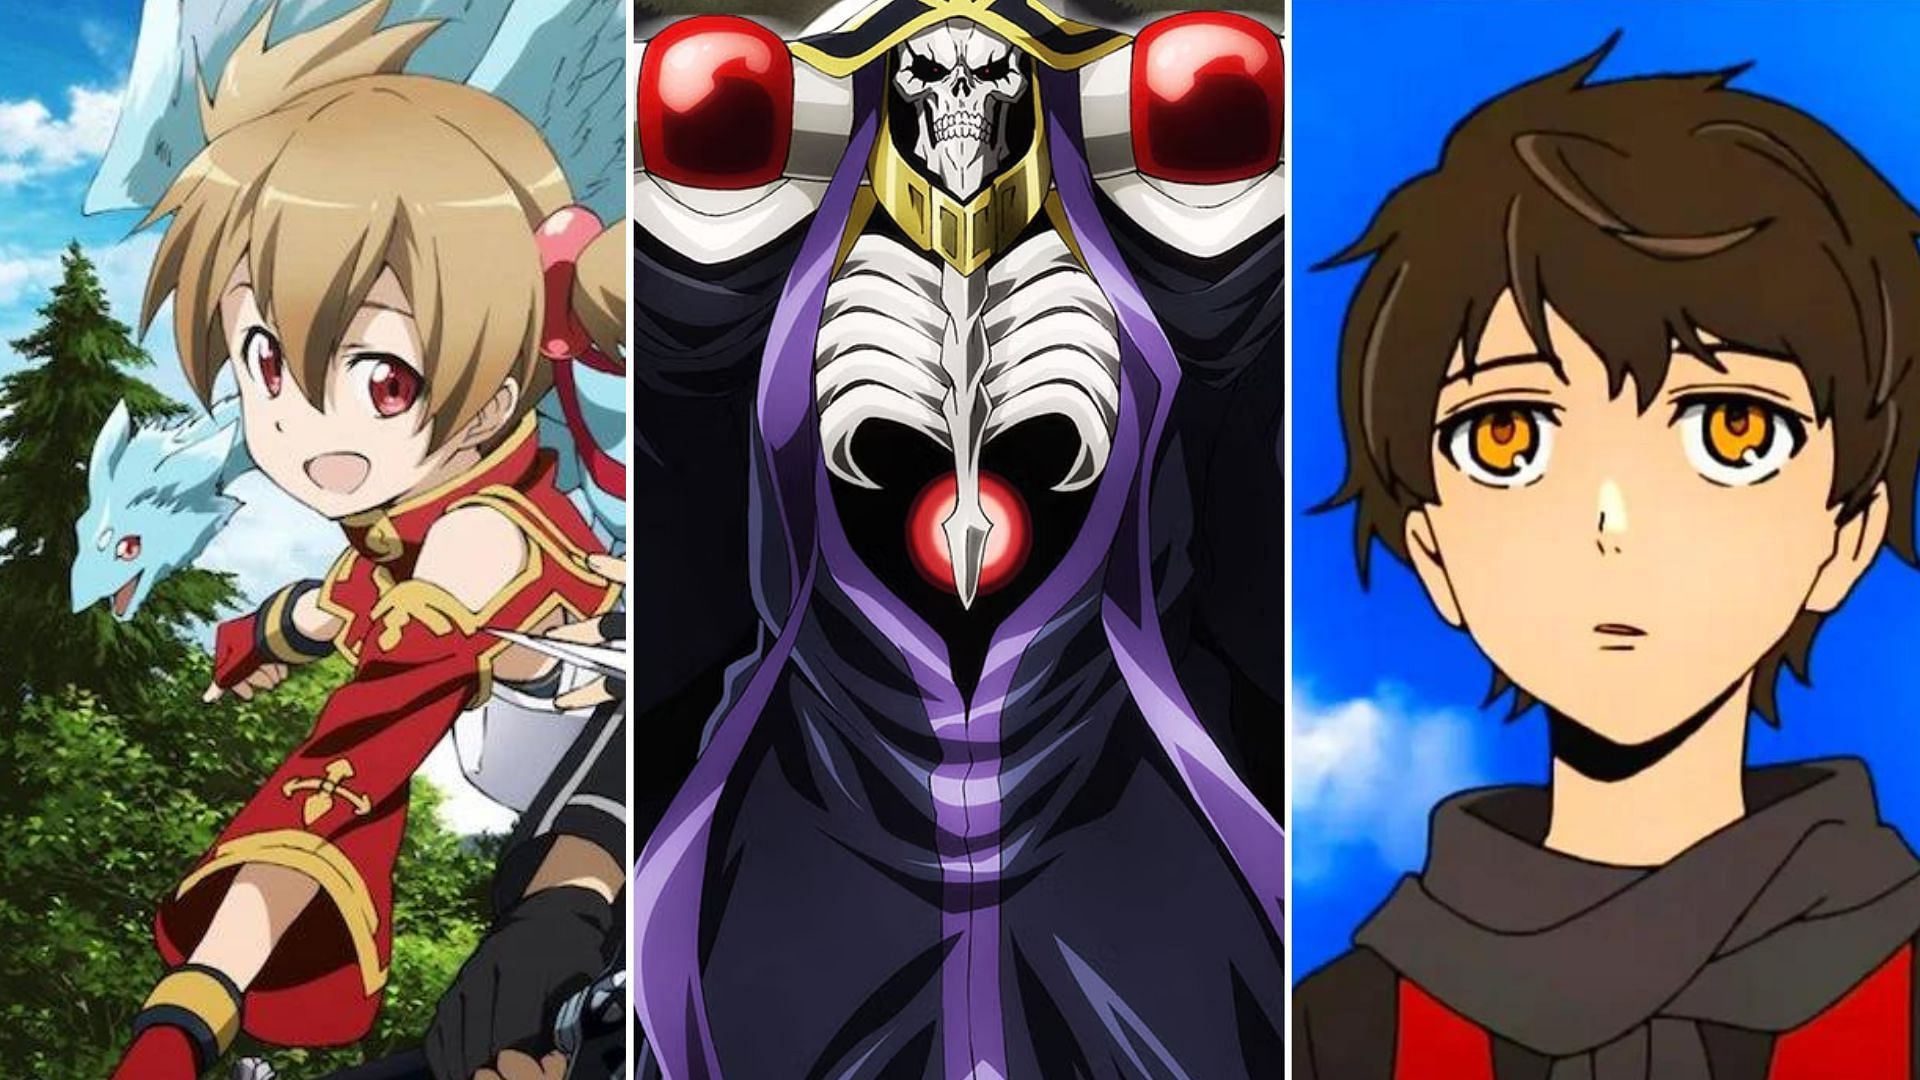 Sword Art Online, Overlord, Tower of God 